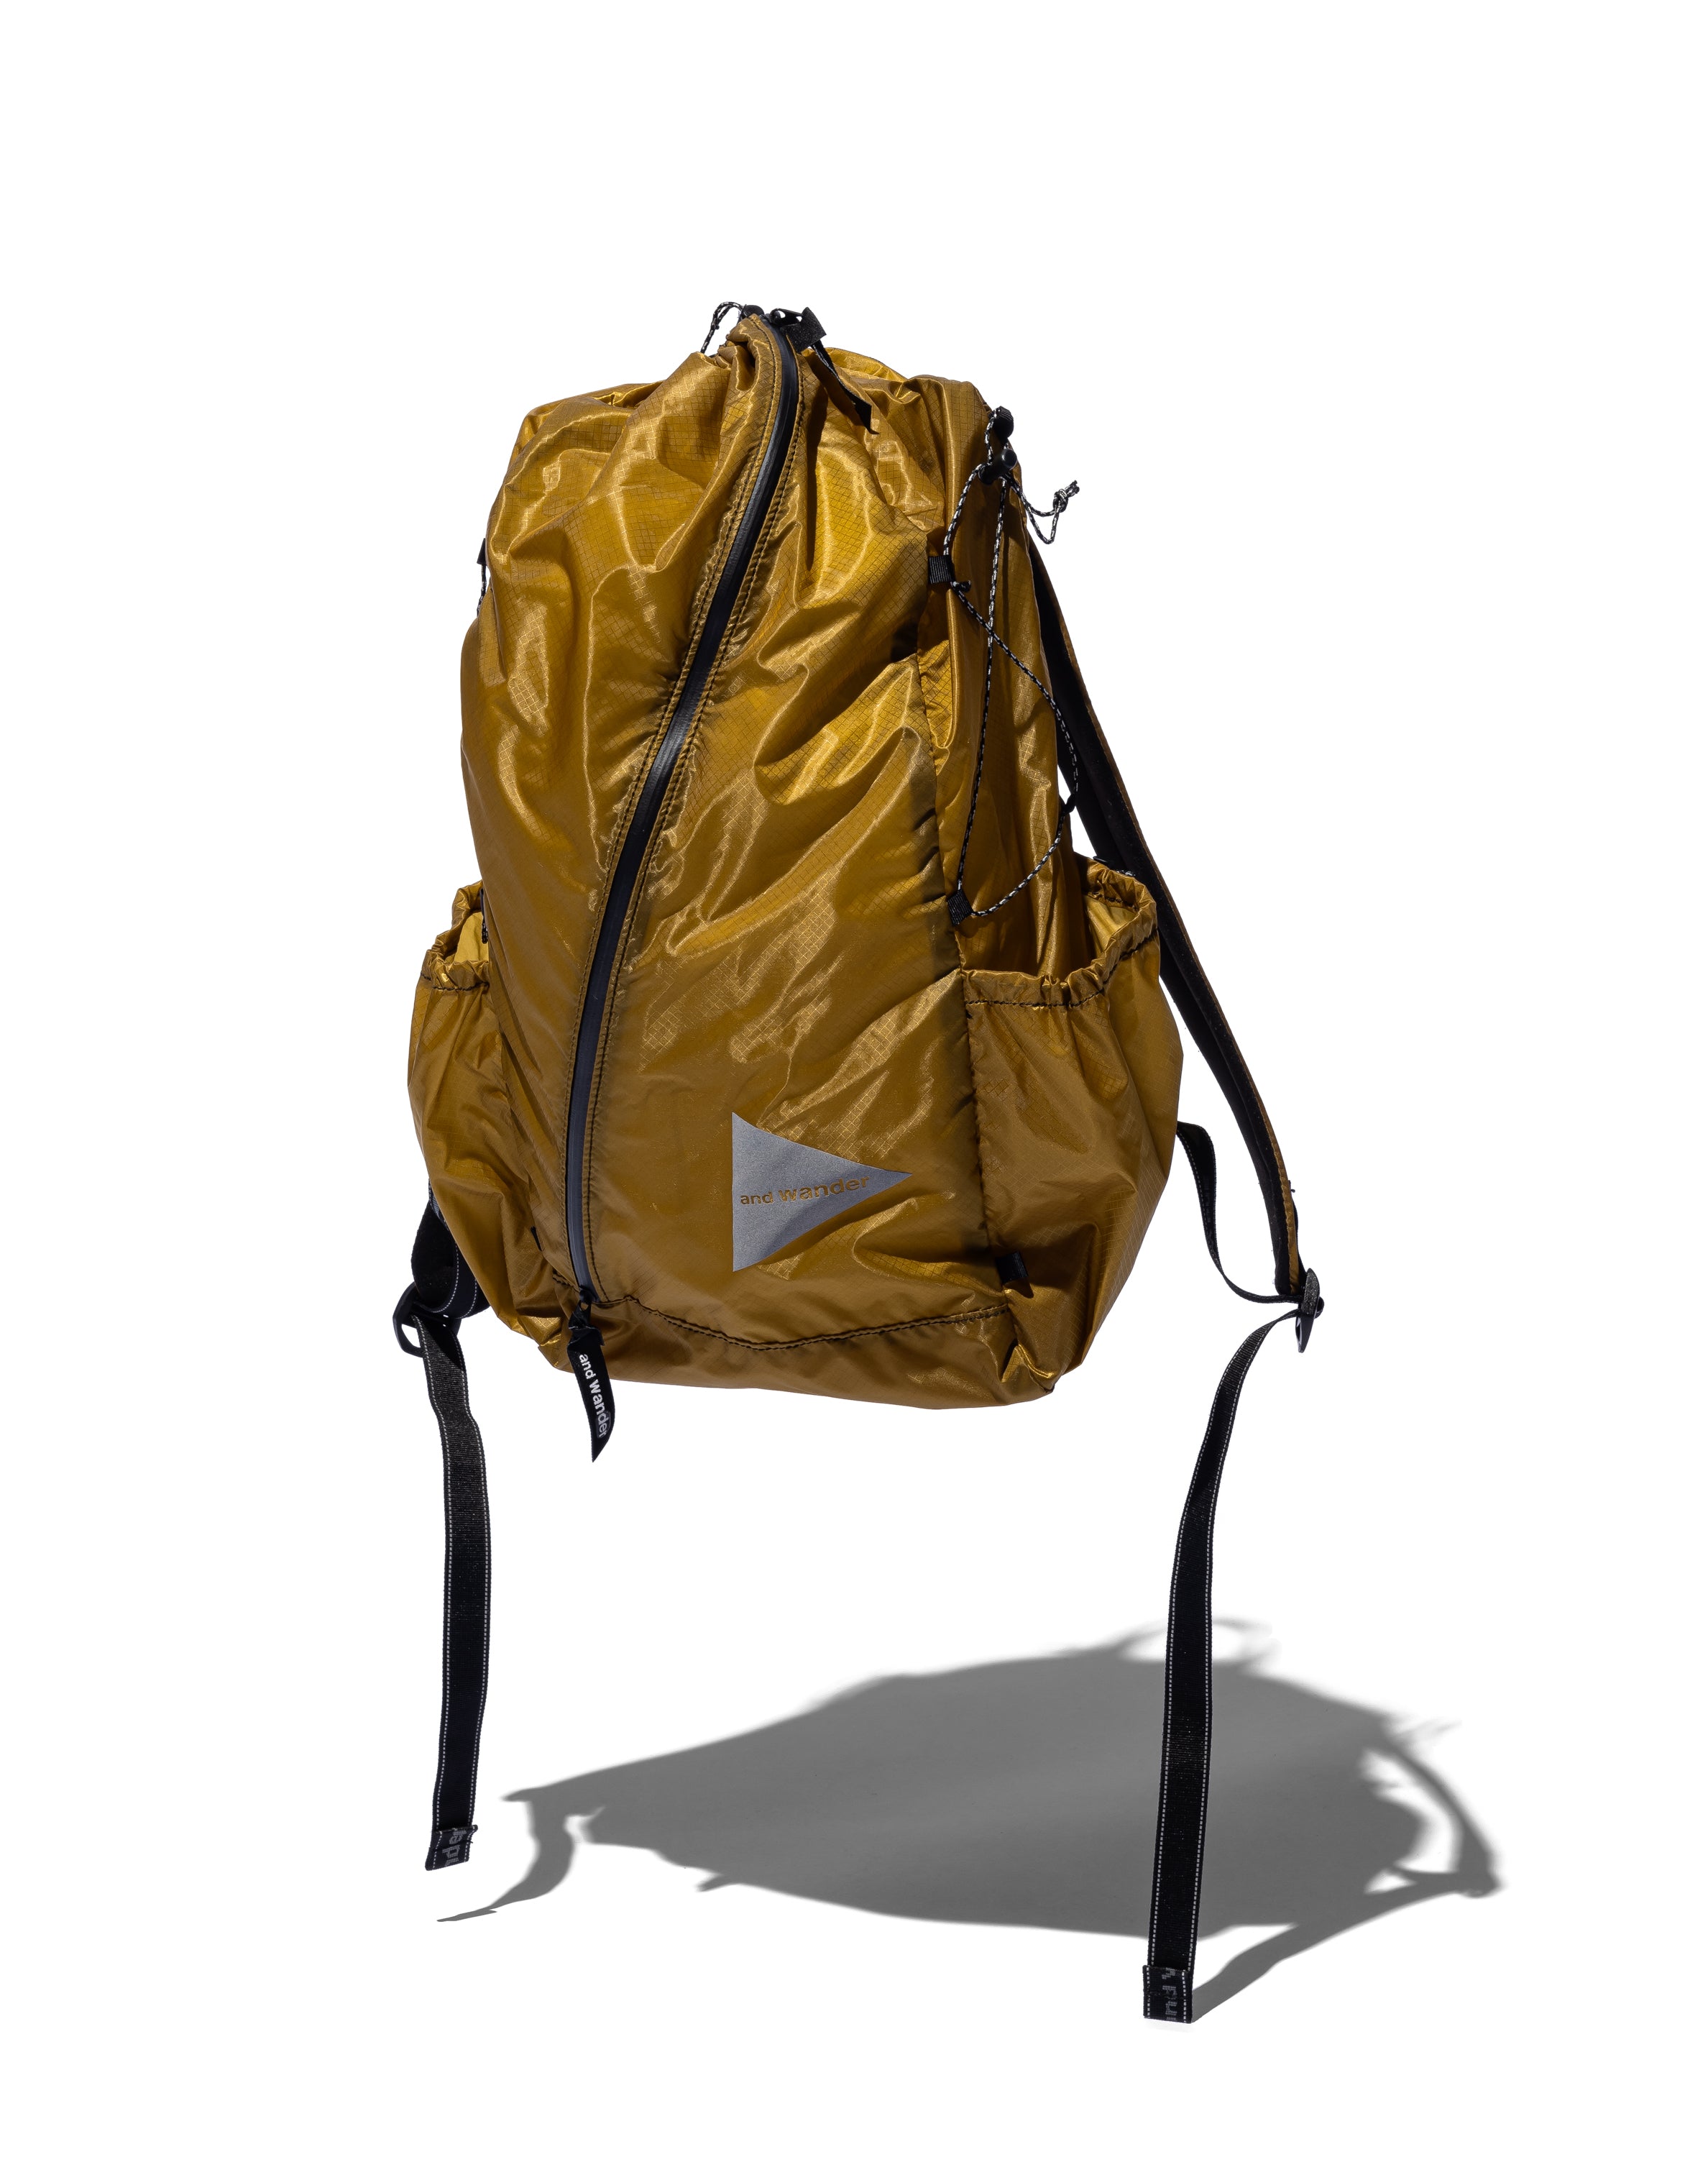 Sil Daypack – A YOUNG HIKER